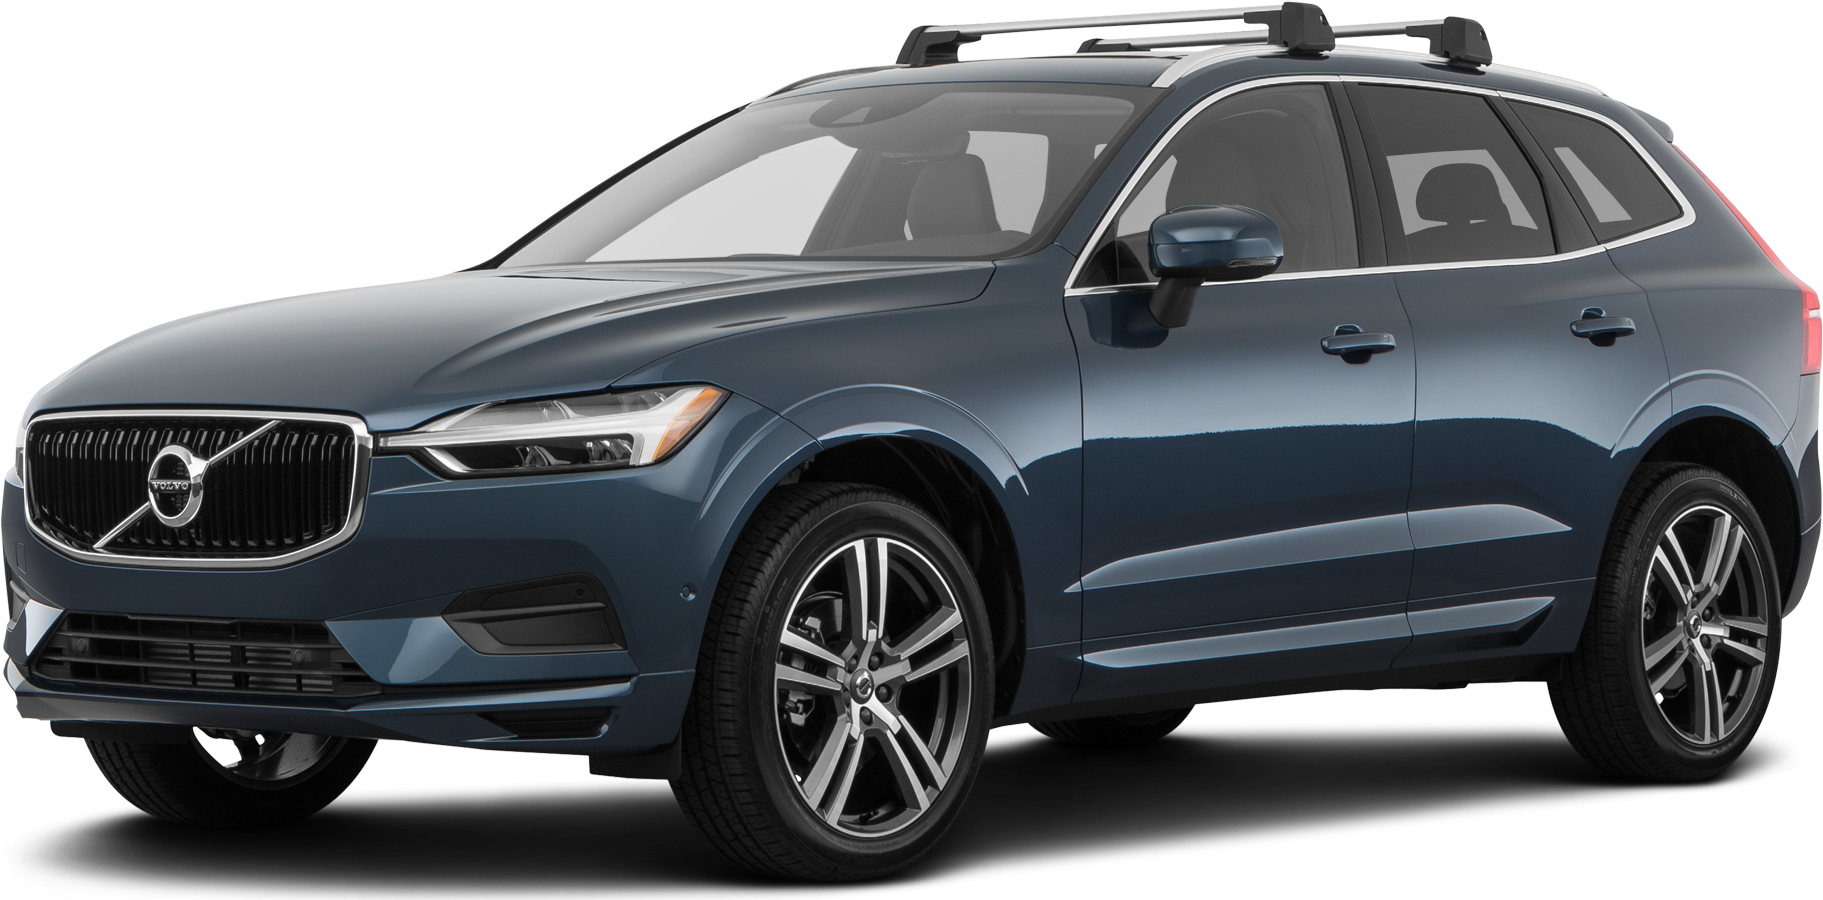 2018 Volvo XC60 Price, Value, Ratings & Reviews